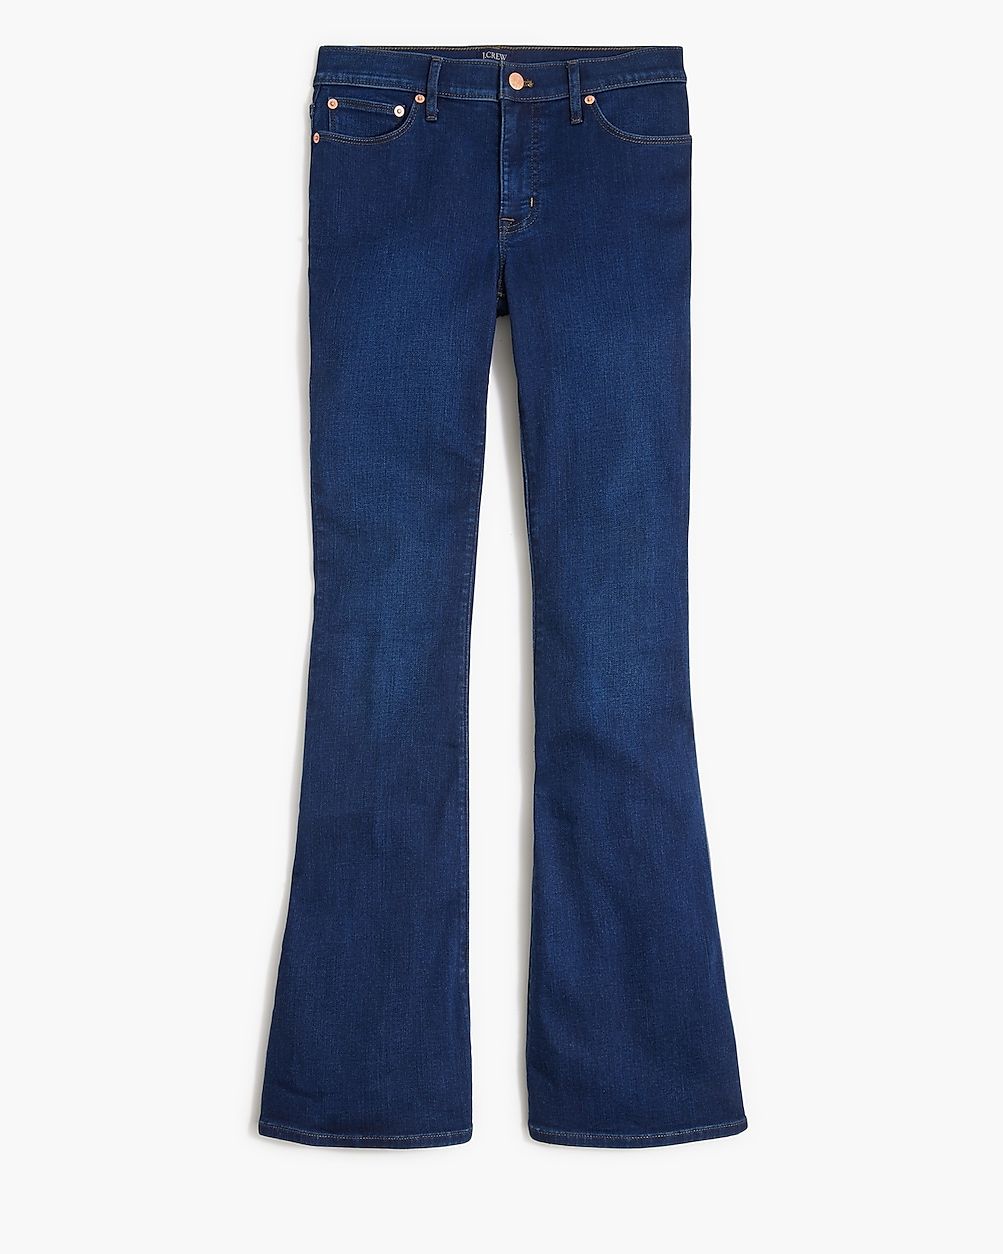 Full-length flare jean in signature stretch | J.Crew Factory